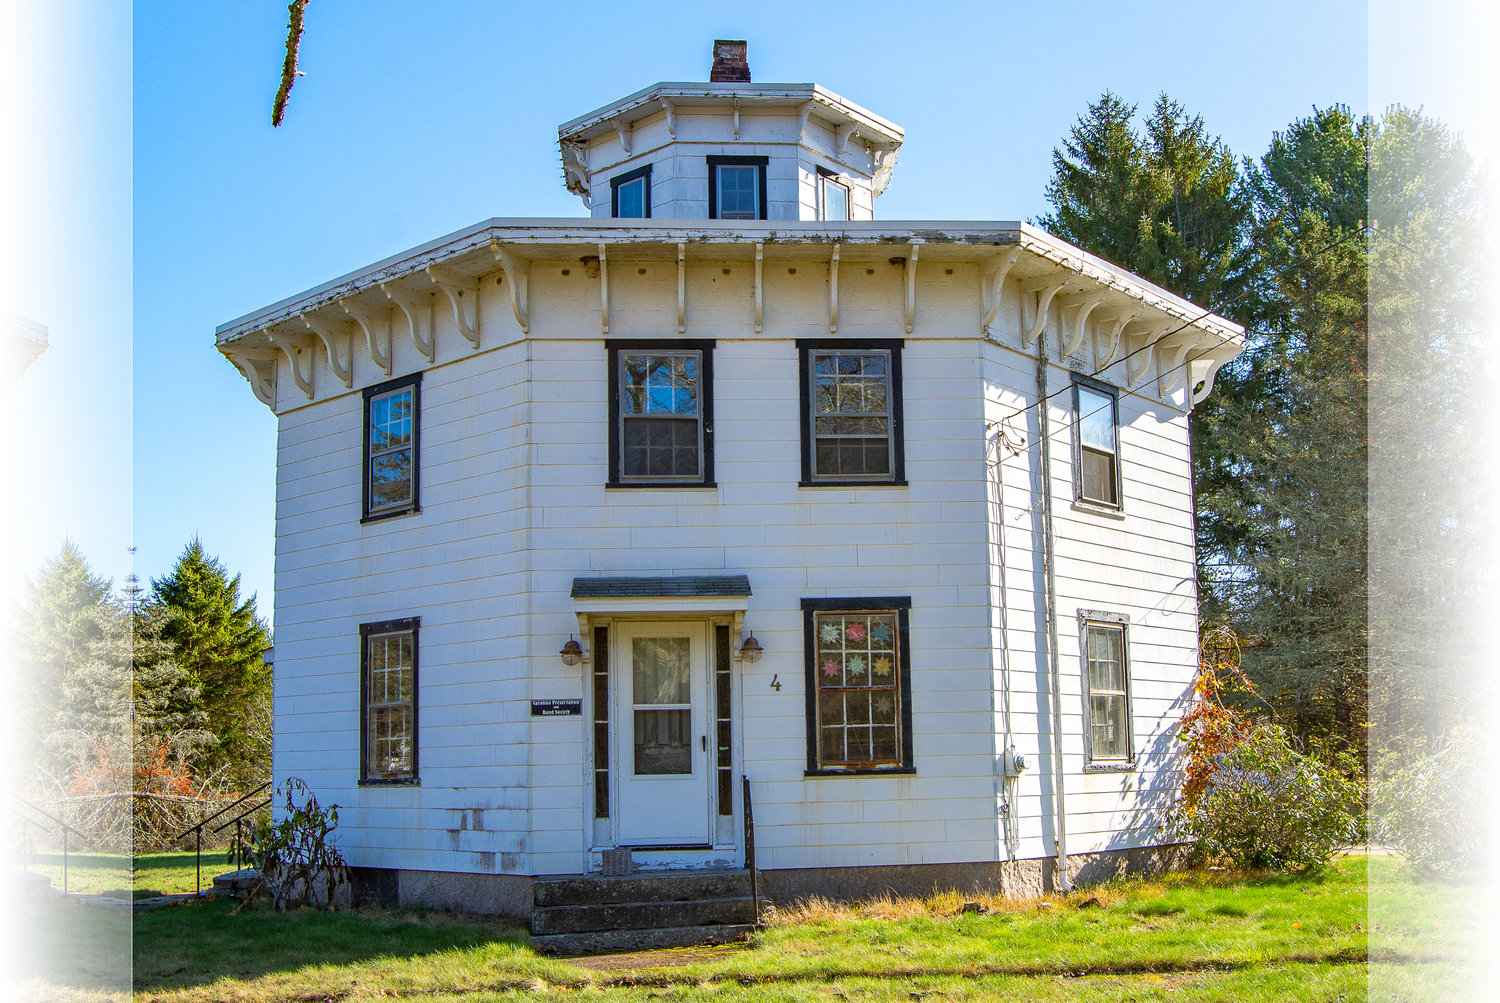 Octagon House, Richmond: Octagonal houses became a fad in the 1850s, when they were widely advertised as lighter, cooler, and more spacious inside than traditional square homes. An older folk belief held that the devil would find no corners in which to hide in an octagonal house.